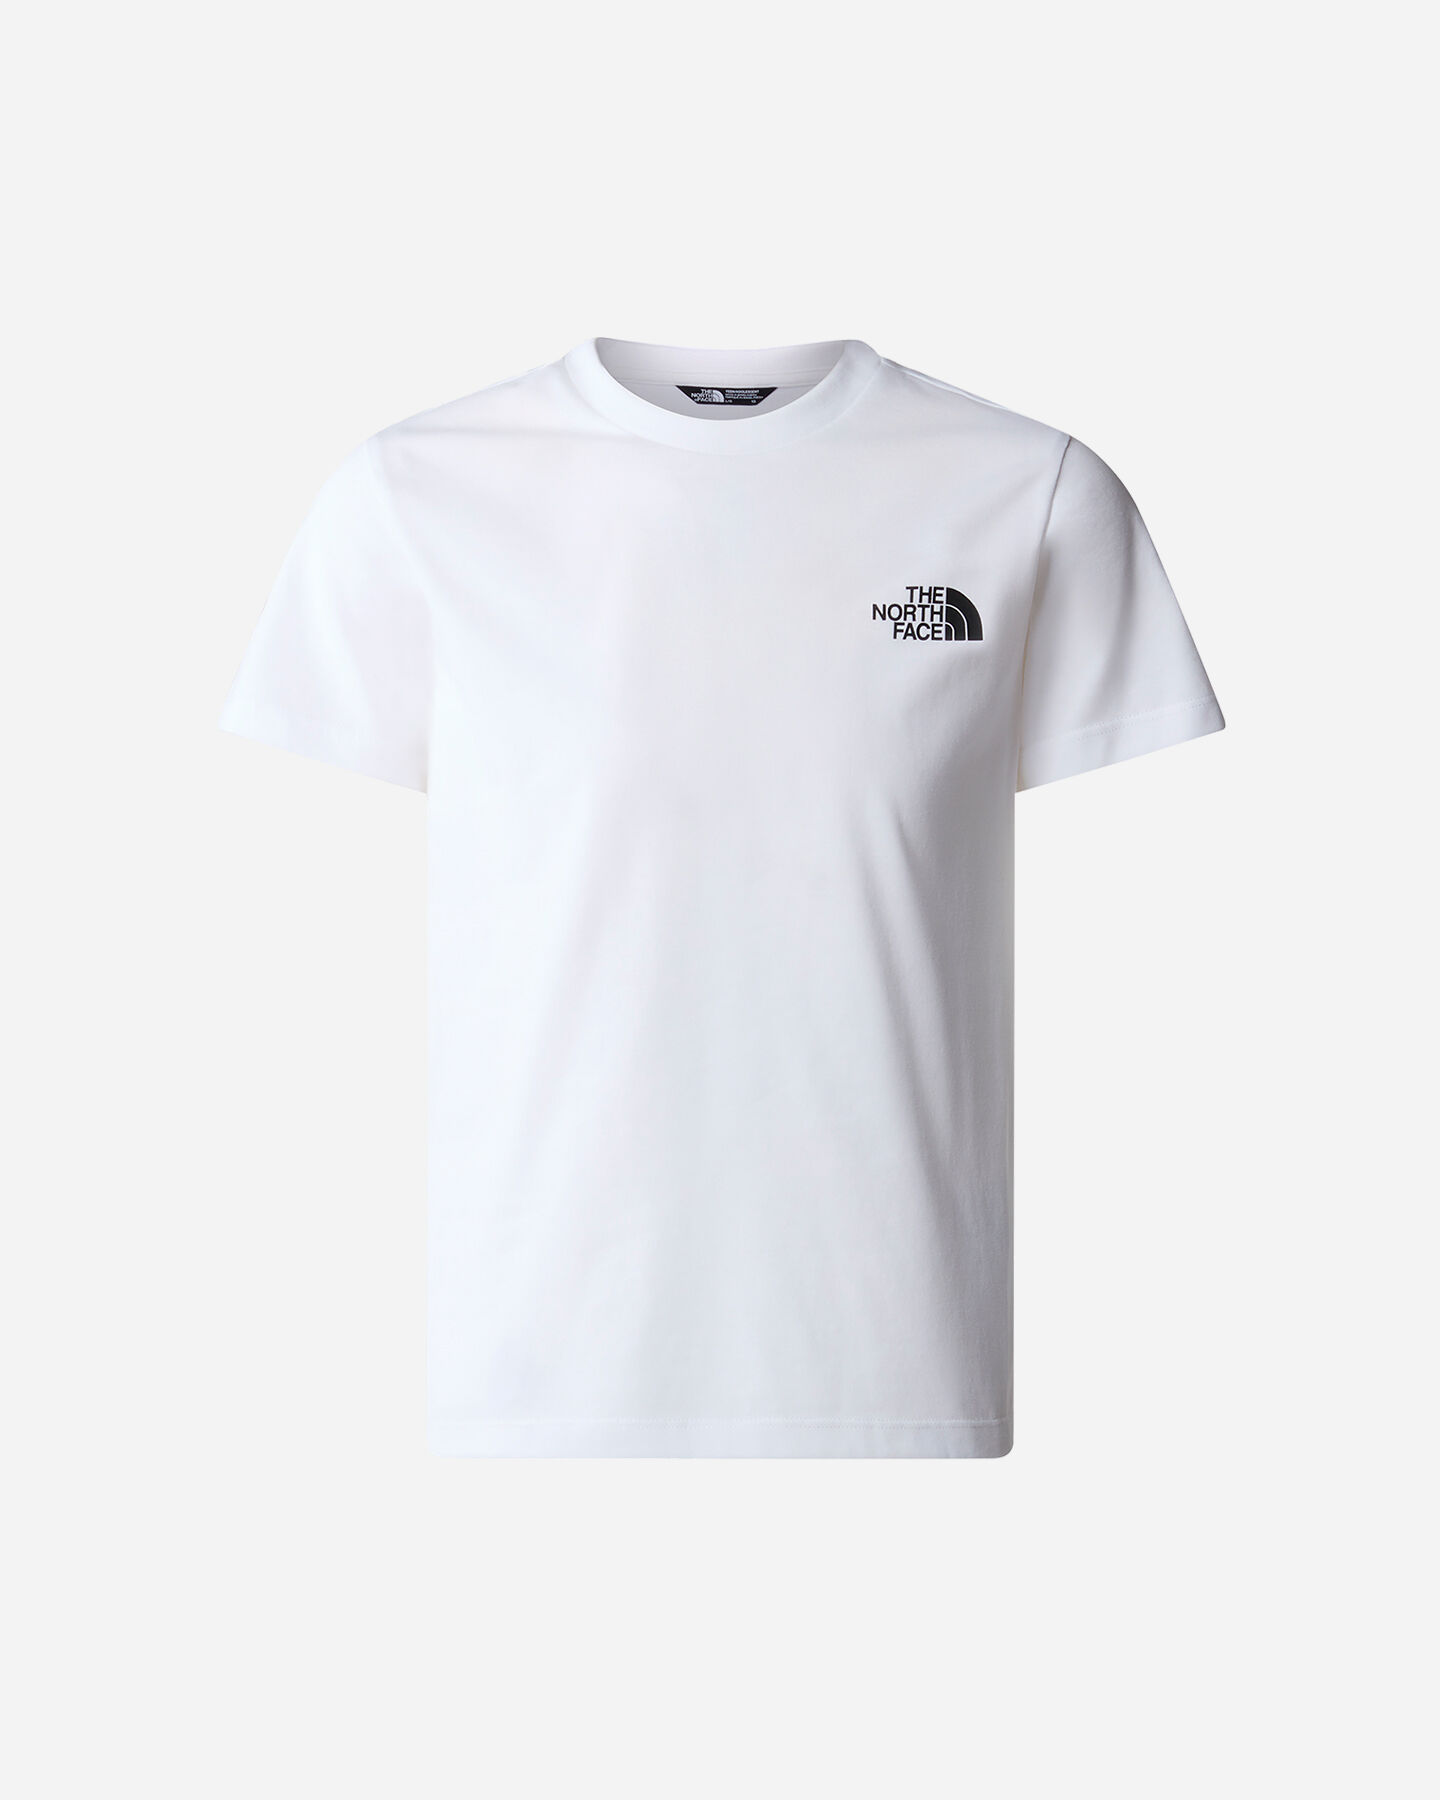  T-Shirt THE NORTH FACE SIMPLE DOME SMALL LOGO JR S5651141|FN4|S scatto 0